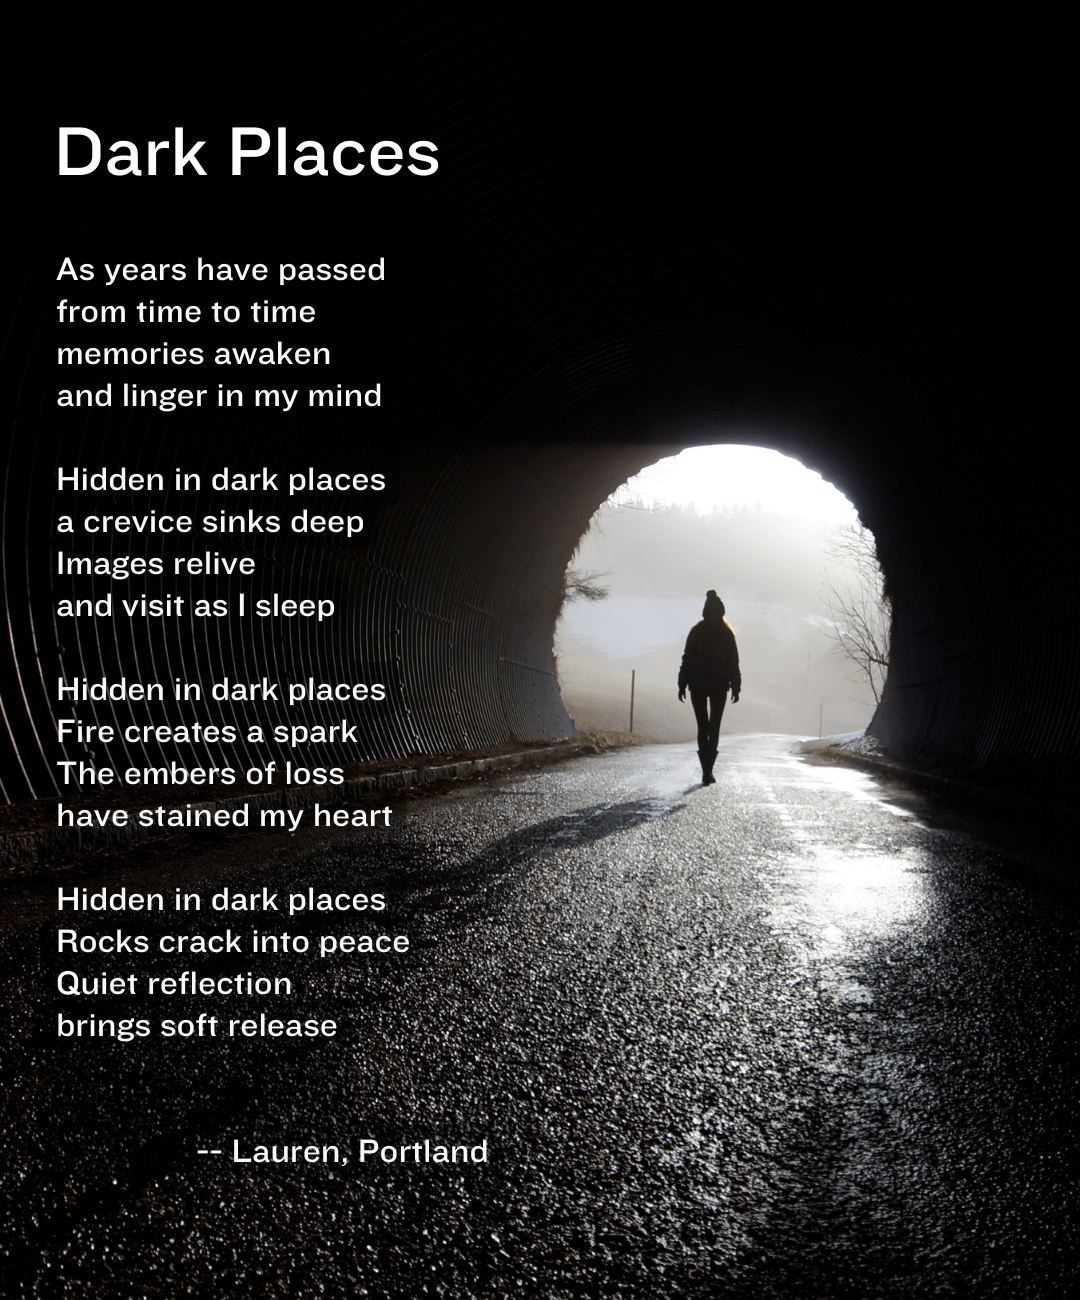 poem called "Dark Places" about mental wellness